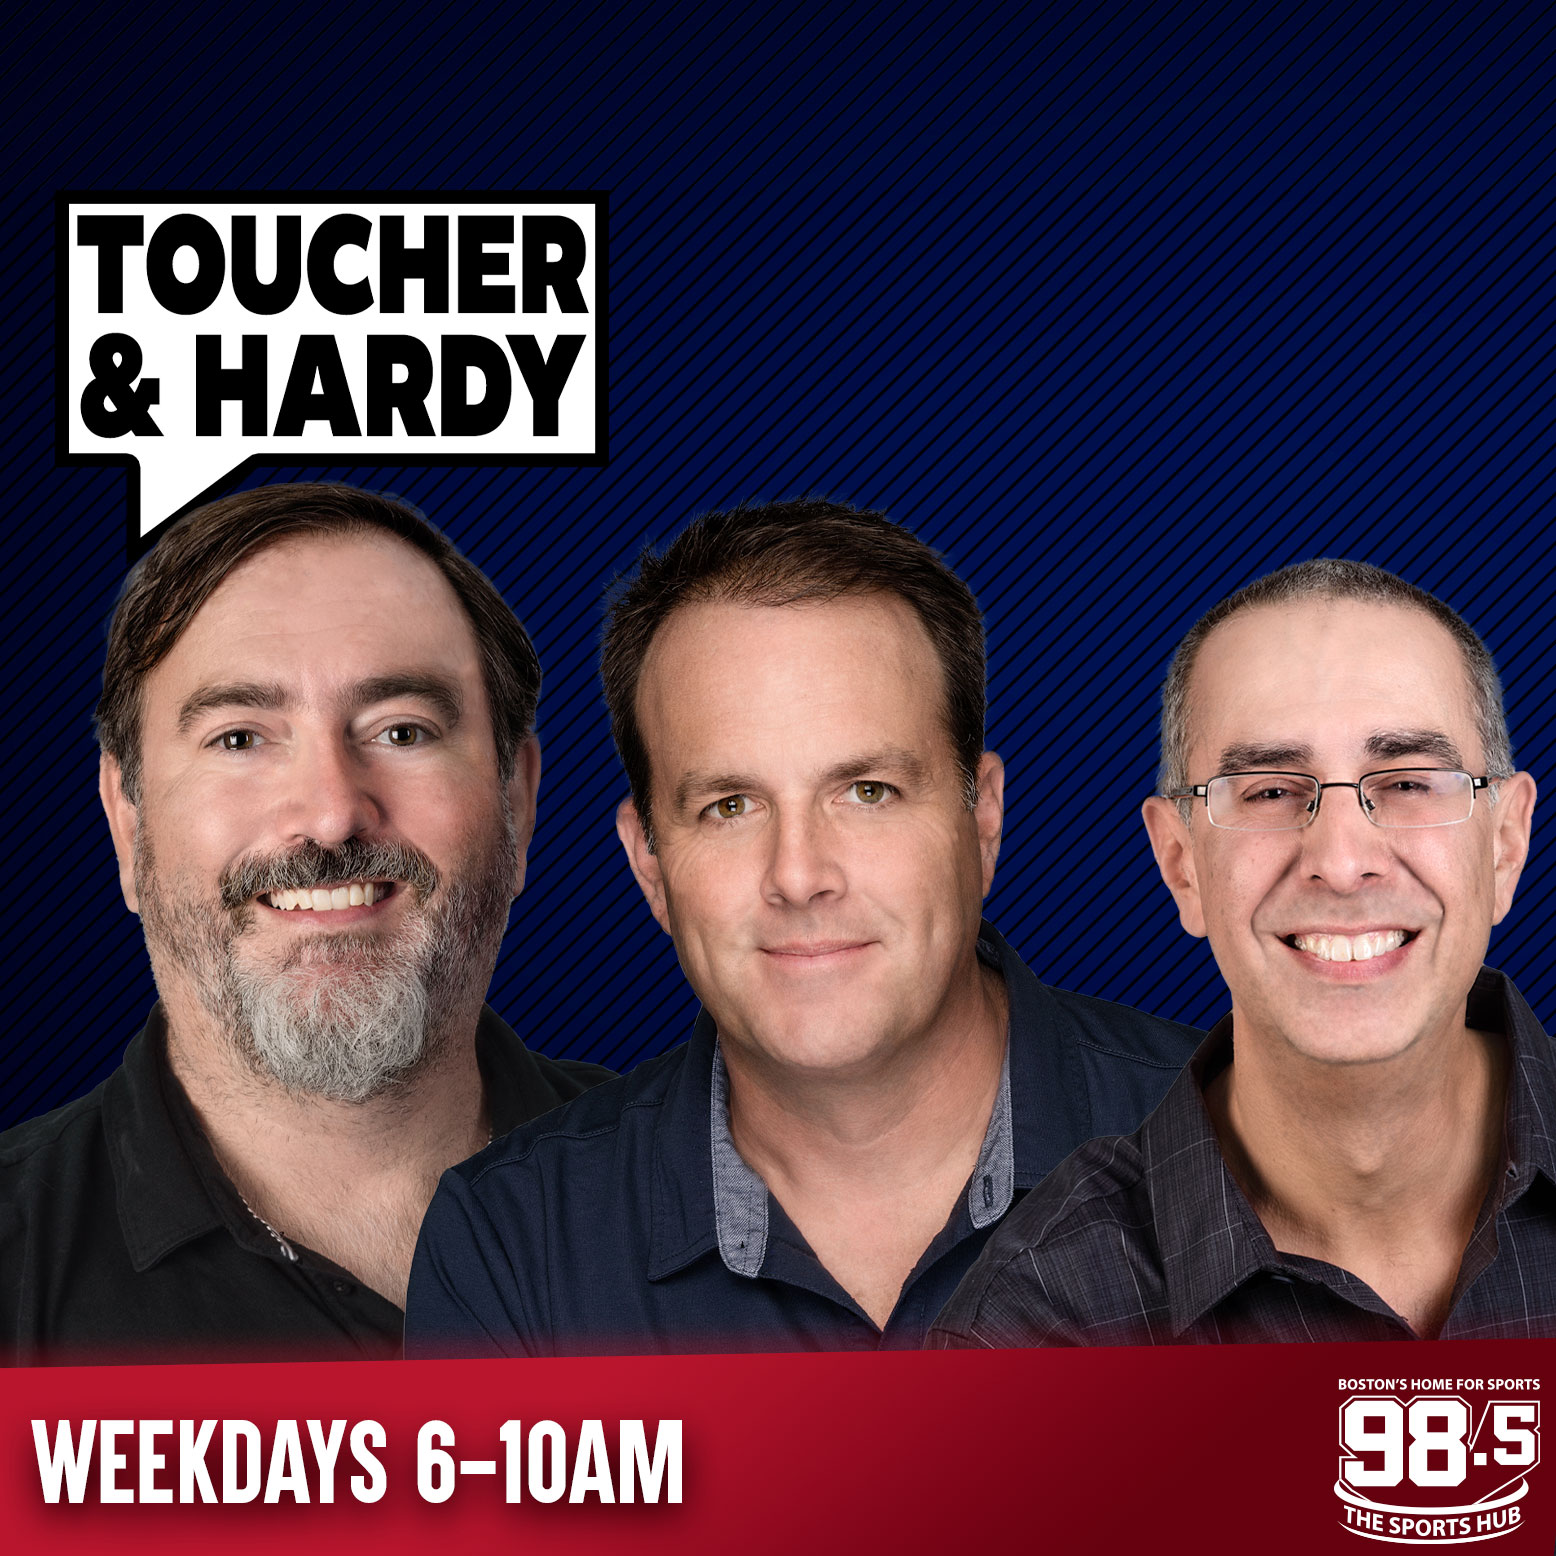 It’s WIDE OPEN For The Patriots // Full House Talk // Bruce Cassidy Rips Into Bruins After Loss - 11/12 (Hour 3)